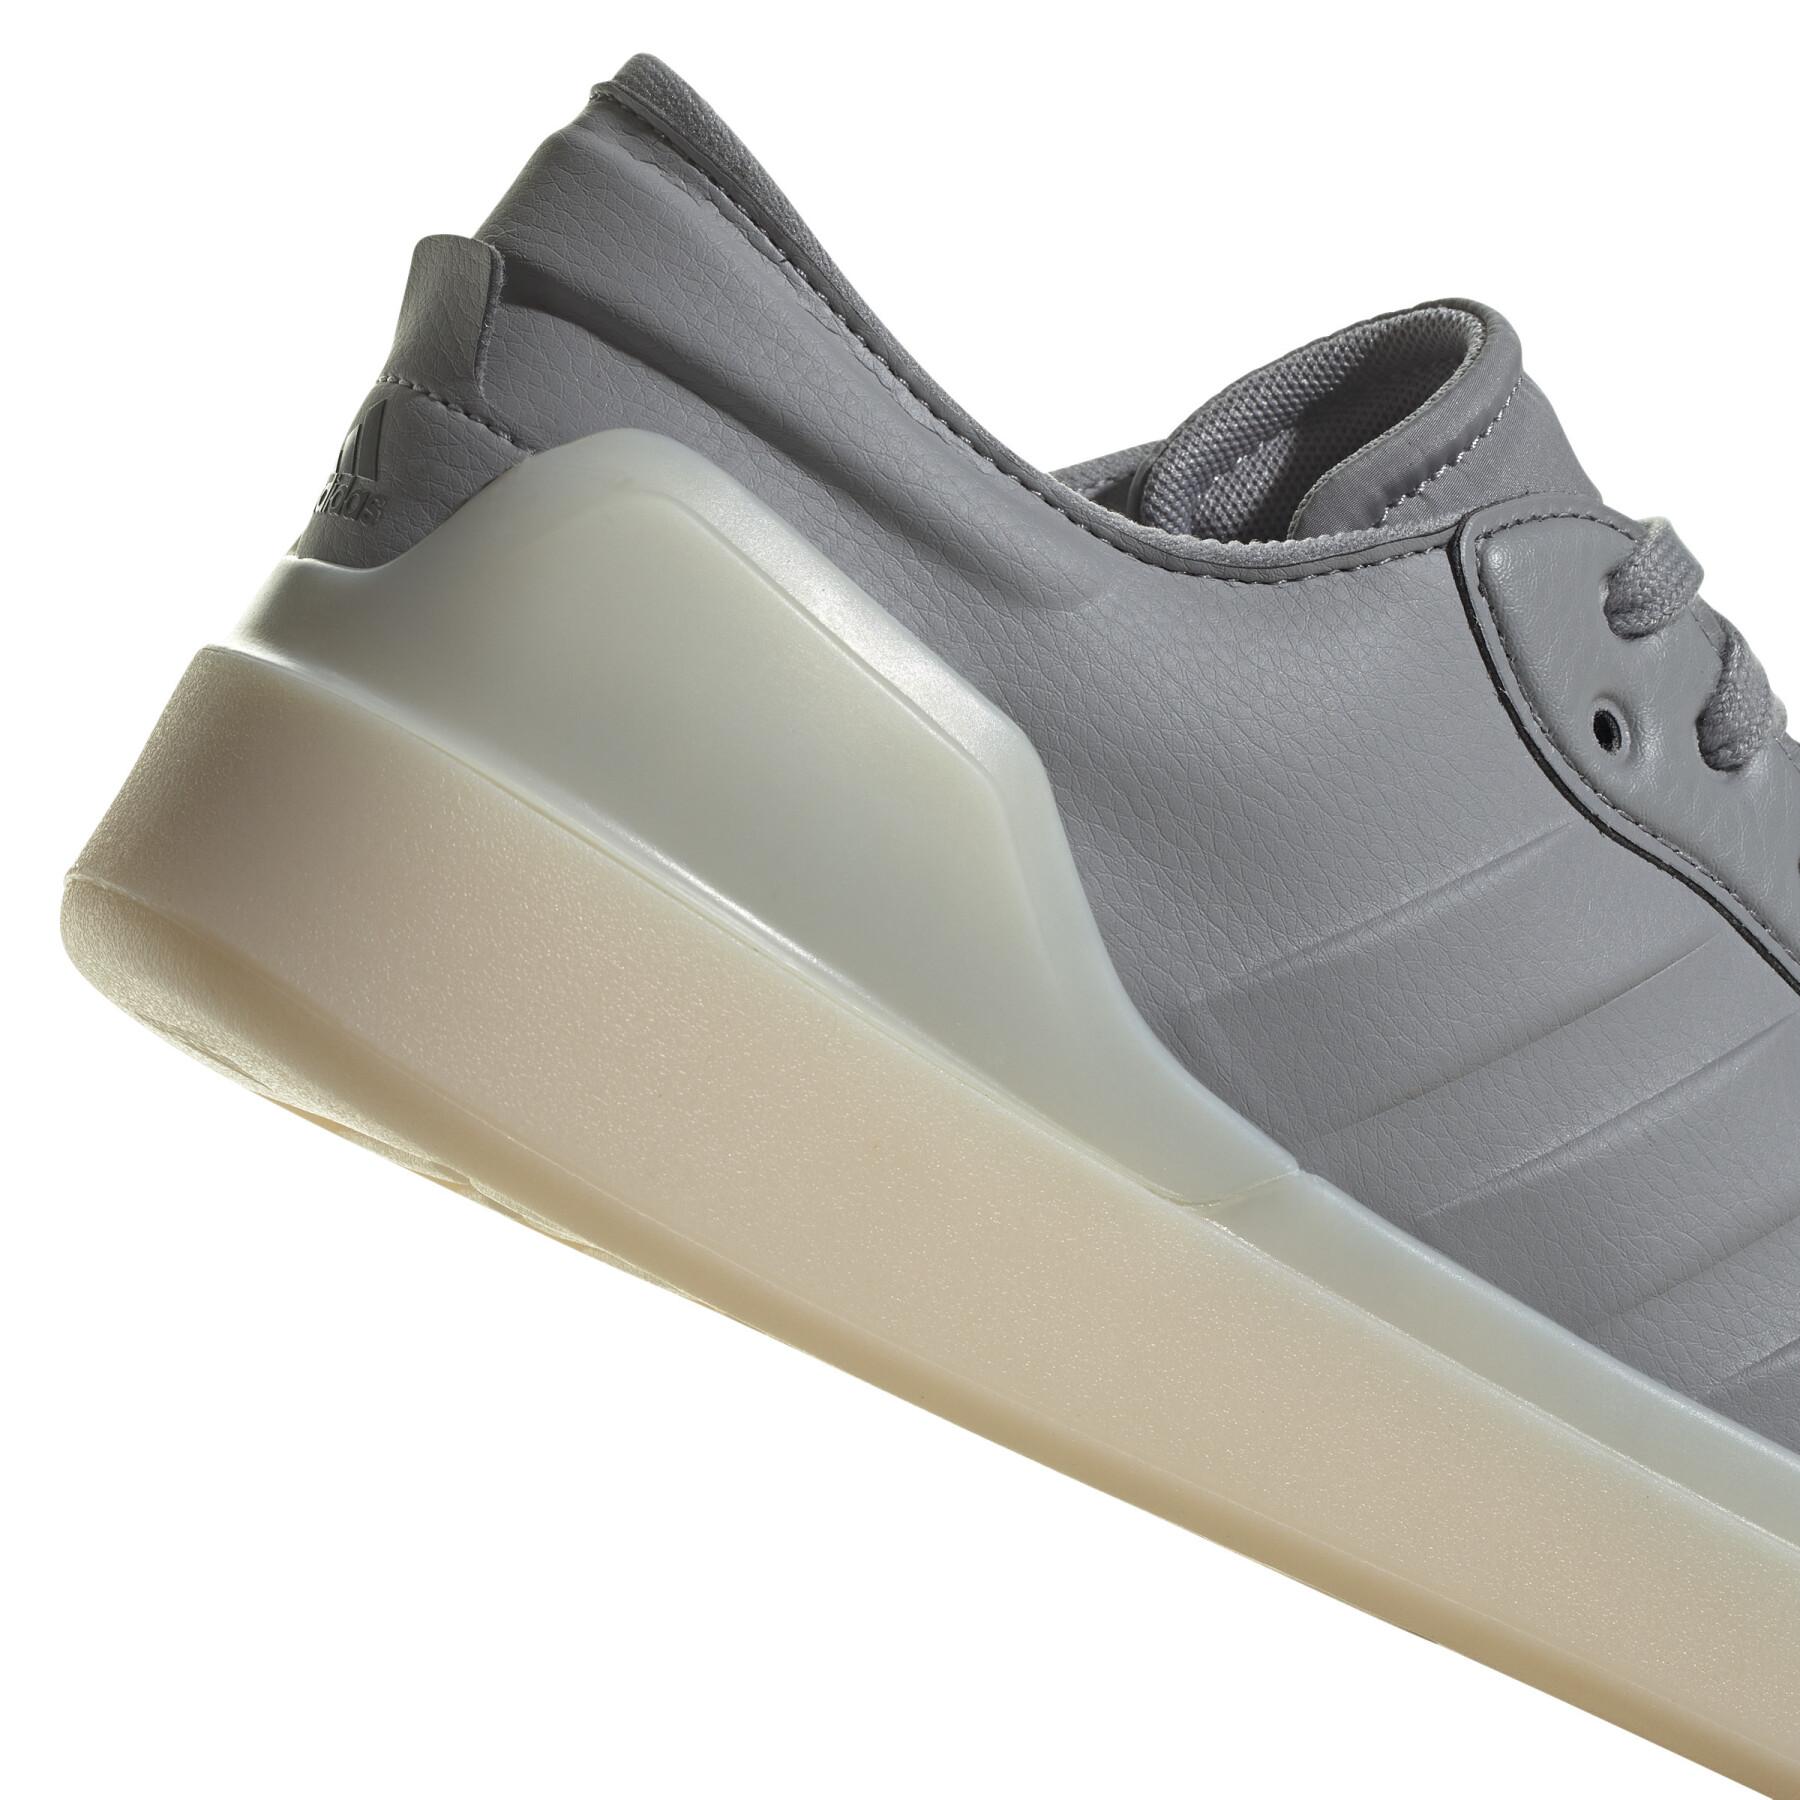 Trainers adidas Court Revival